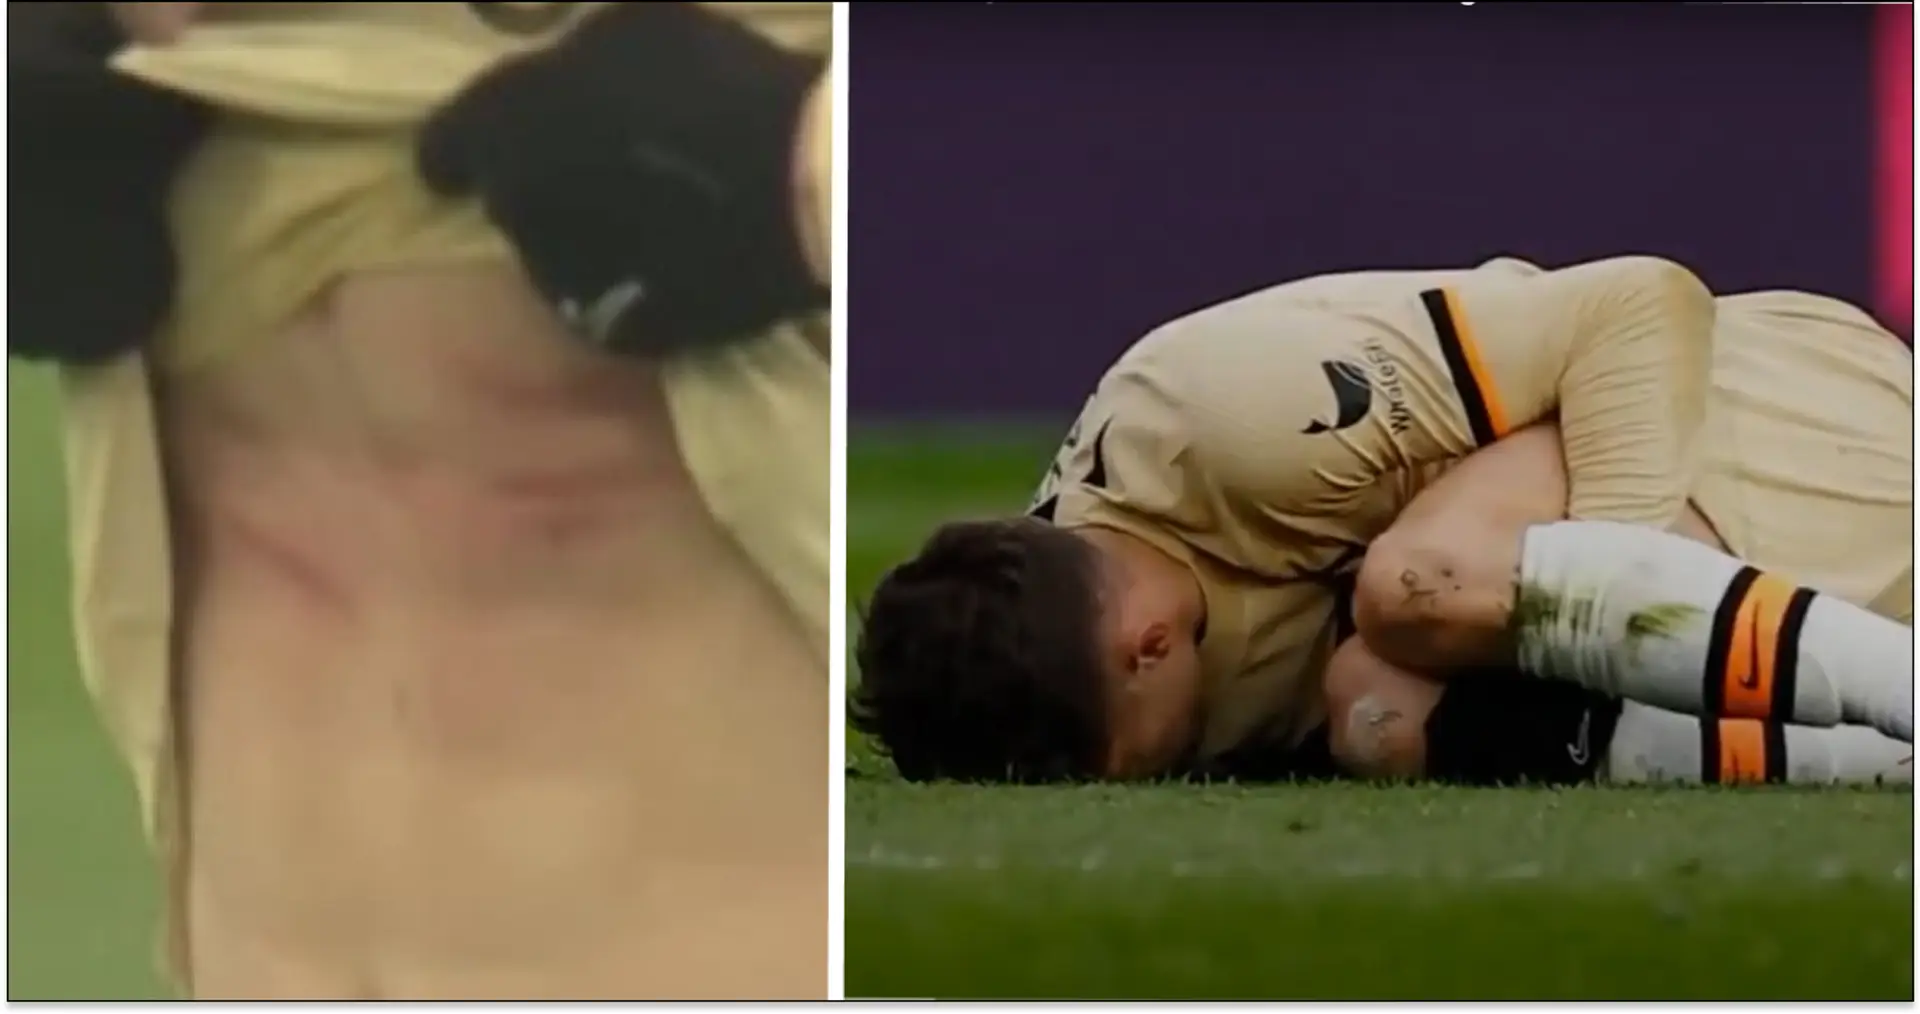 Spotted: Stud marks on Havertz's body after Amartey's brutal foul — not even a booking for Leicester player